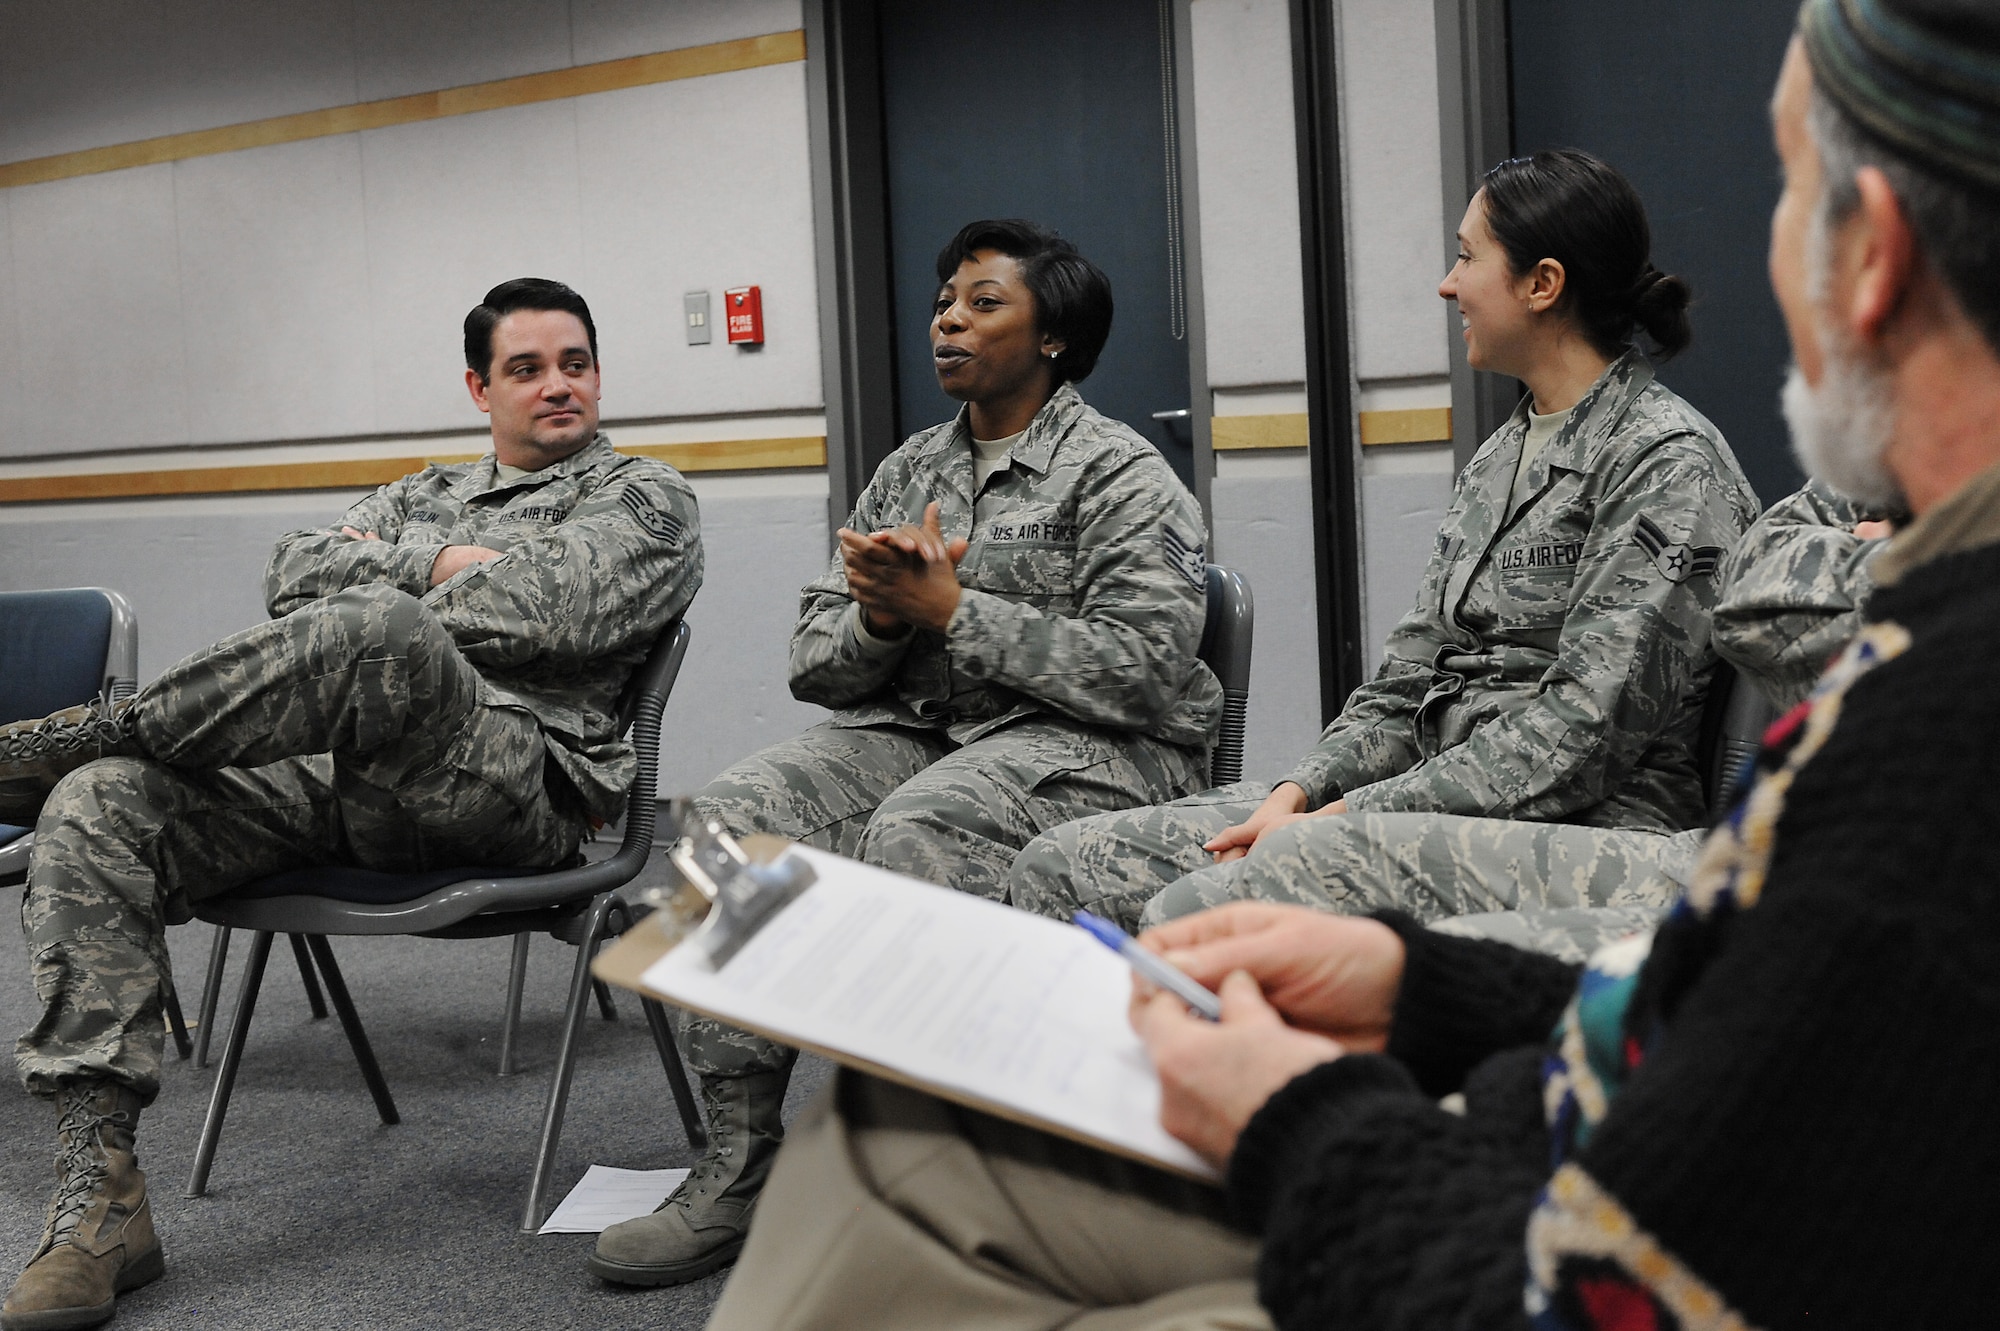 Oregon Air National Guard Staff Sgt. Jennifer Scott, center, shares some of experiences following one-on-one compassionate listening exercise during the 142nd Fighter Wing’s Diversity and Inclusion Counsel meeting, Feb. 8, 2015, Portland Air National Guard Base, Ore. The Diversity and Inclusion Counsel meets during Unit Training Assembly weekends to help develop the total force crucial for mission success. (U.S. Air National Guard photo by Tech. Sgt. John Hughel, 142nd Fighter Wing Public Affairs/Released)